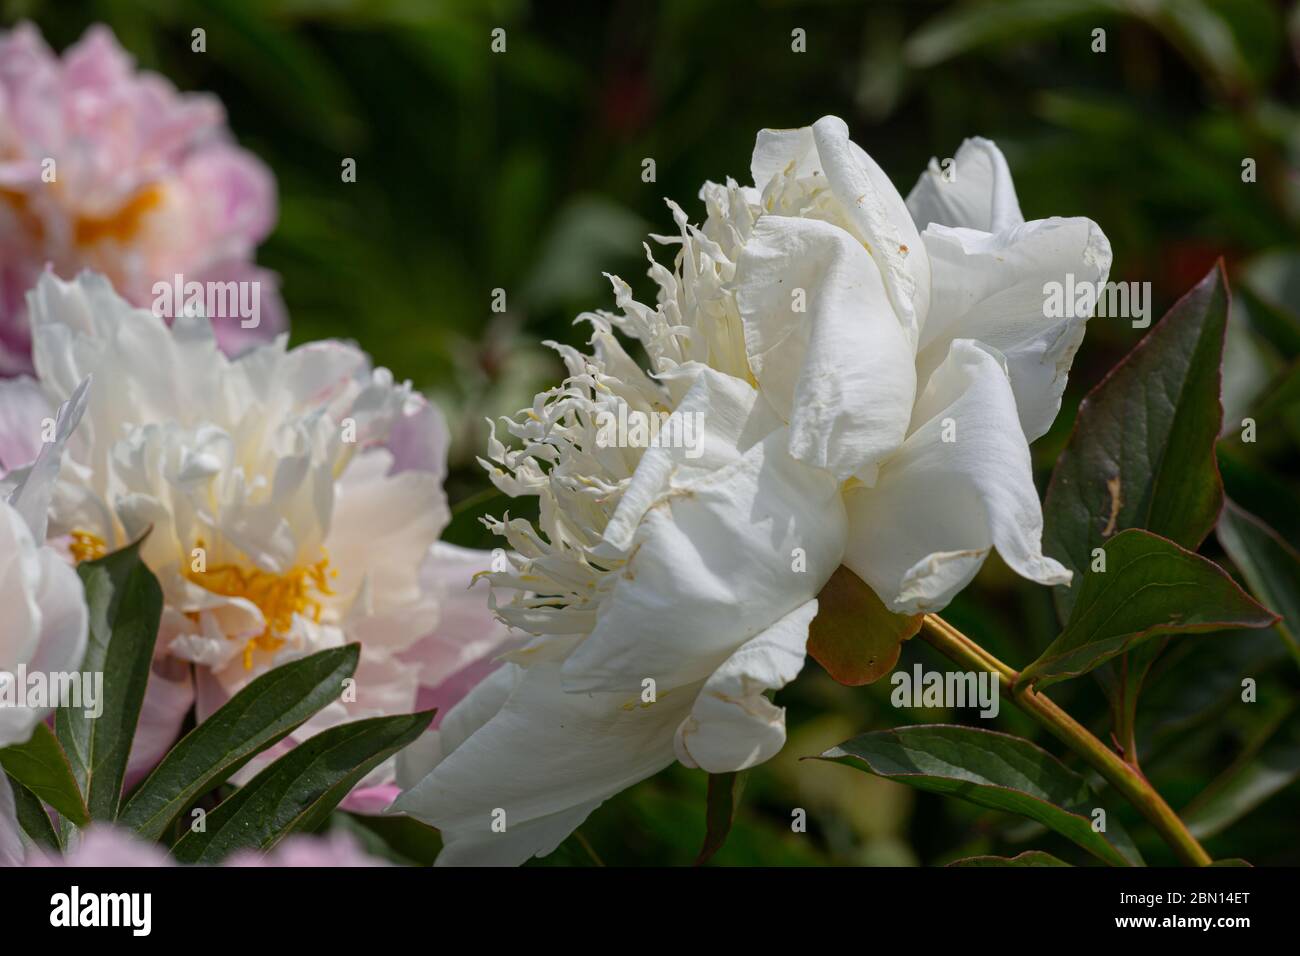 Close-up of a blooming peony (paeonia) with white petals and filaments and blurry peonies in the background Stock Photo